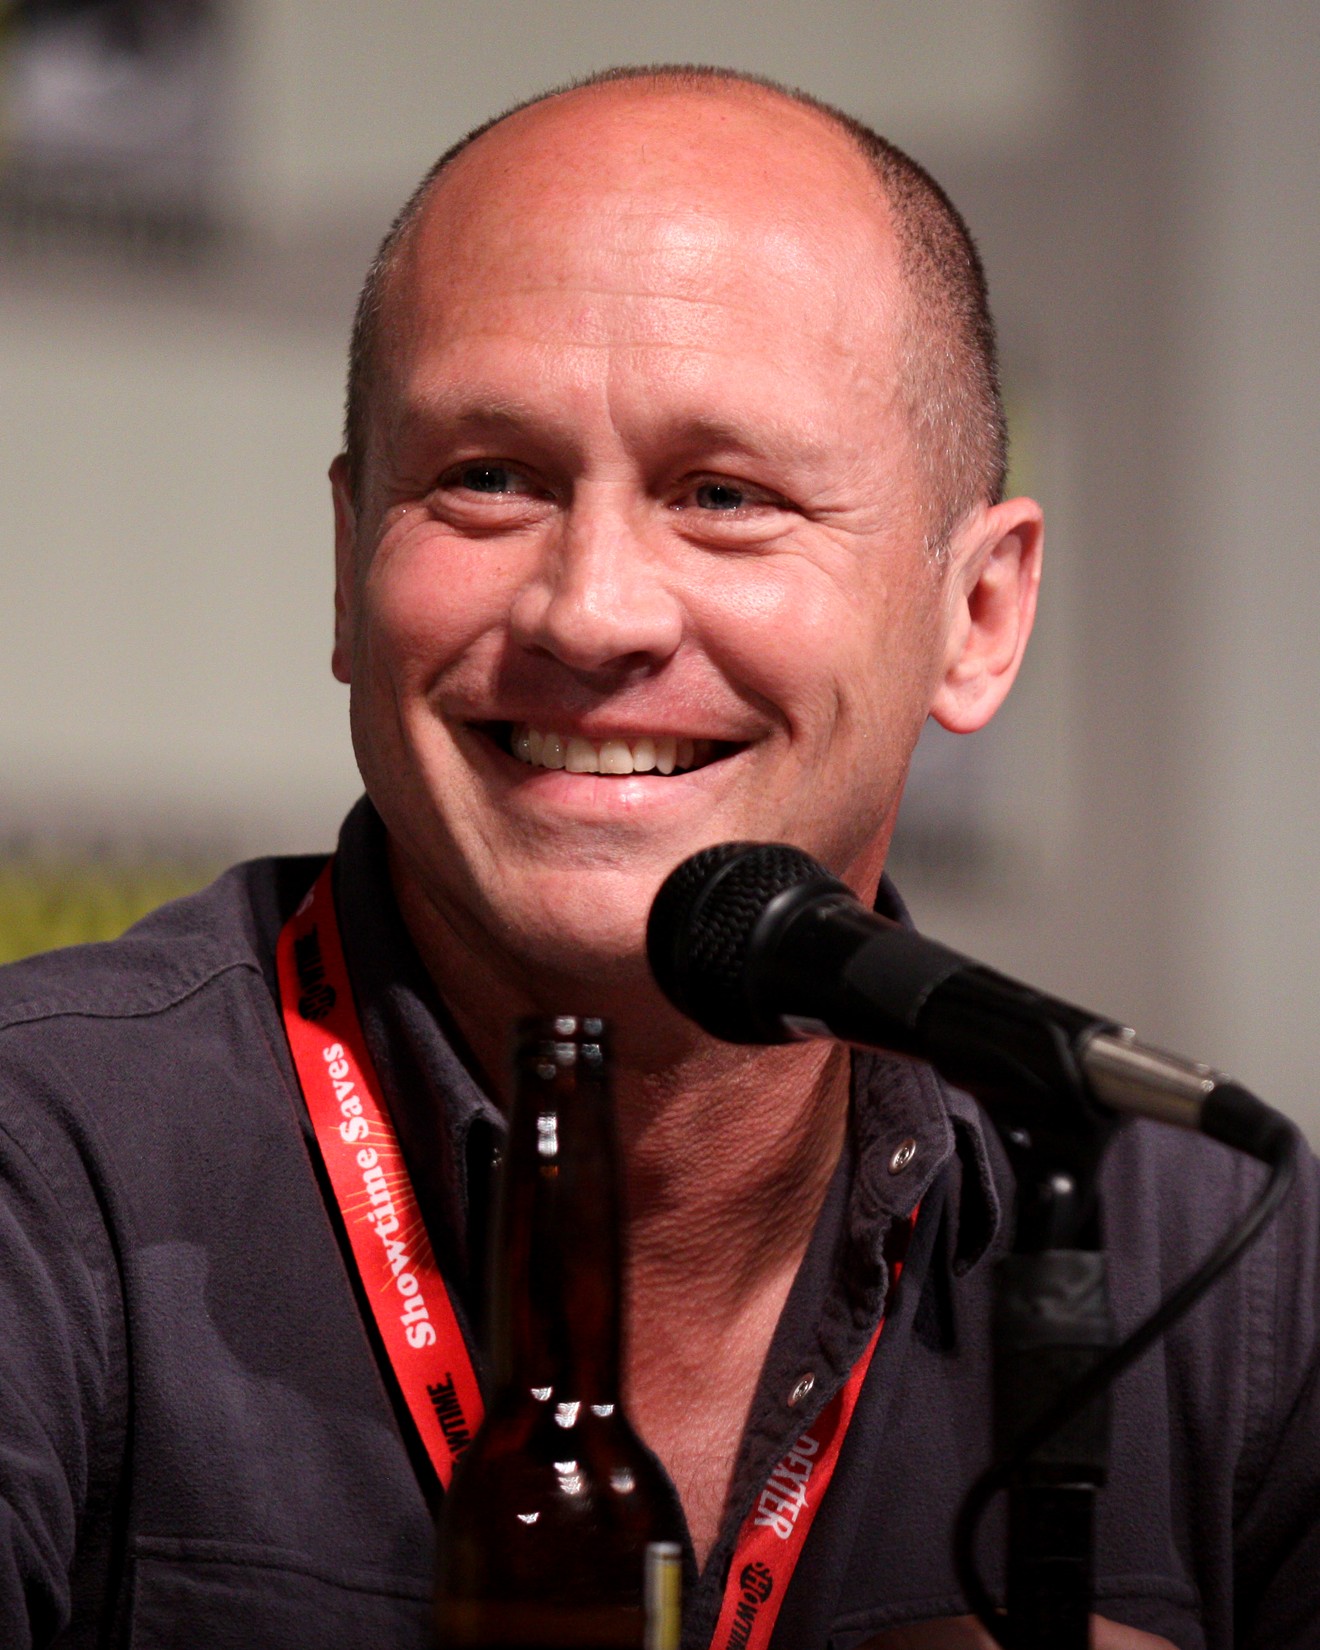 King of the Hill co-creator Mike Judge